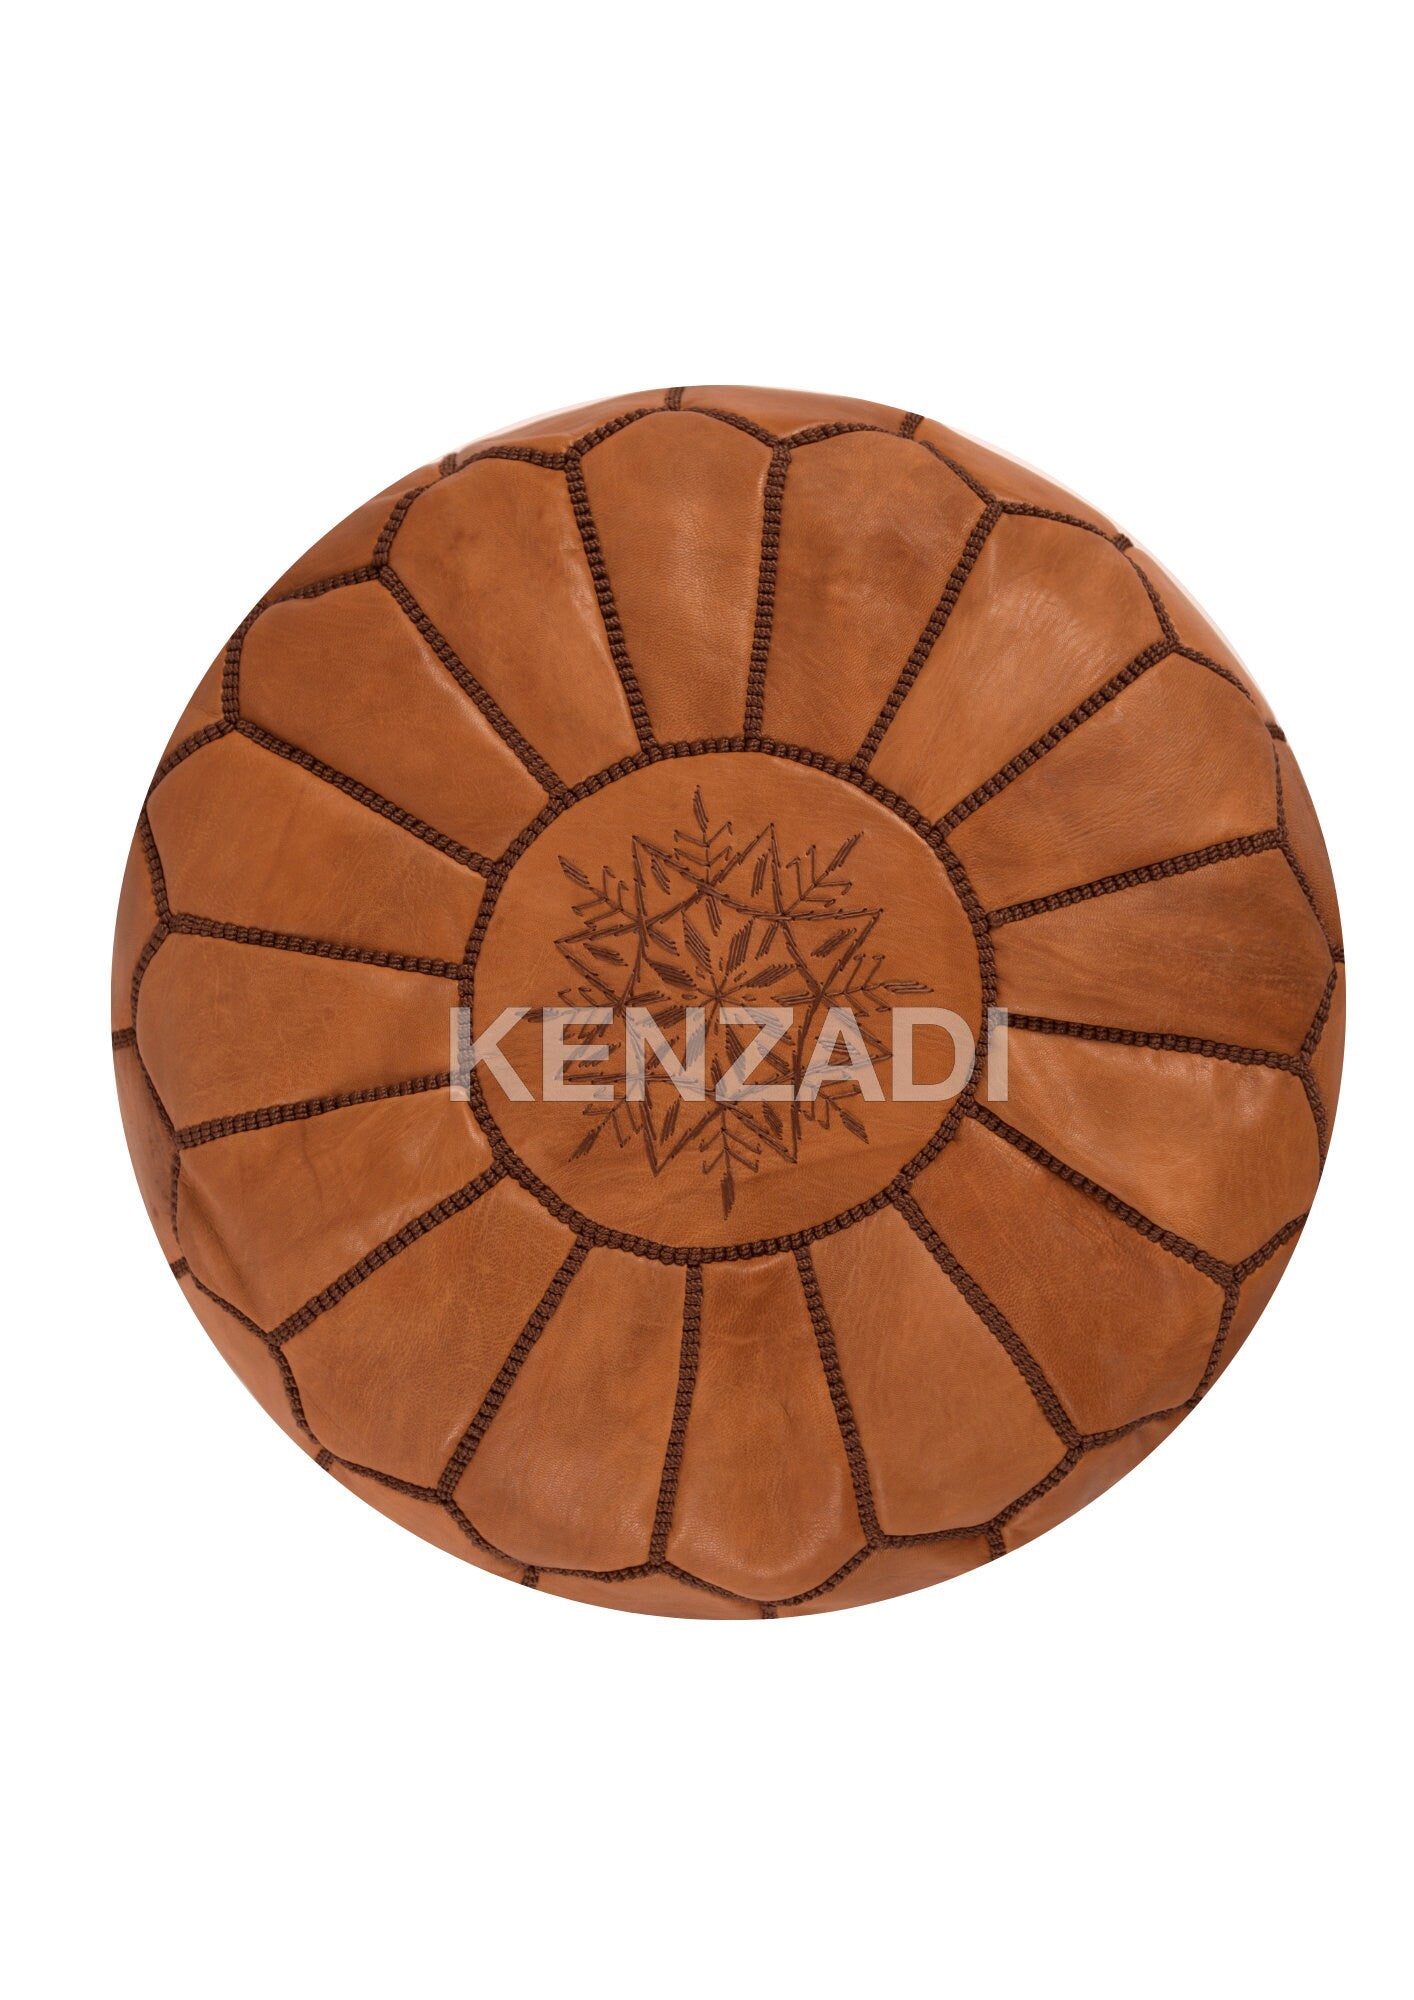 Moroccan leather pouf, round pouf, berber pouf, brown pouf with brown embroidery by Kenzadi - Handmade by My Poufs